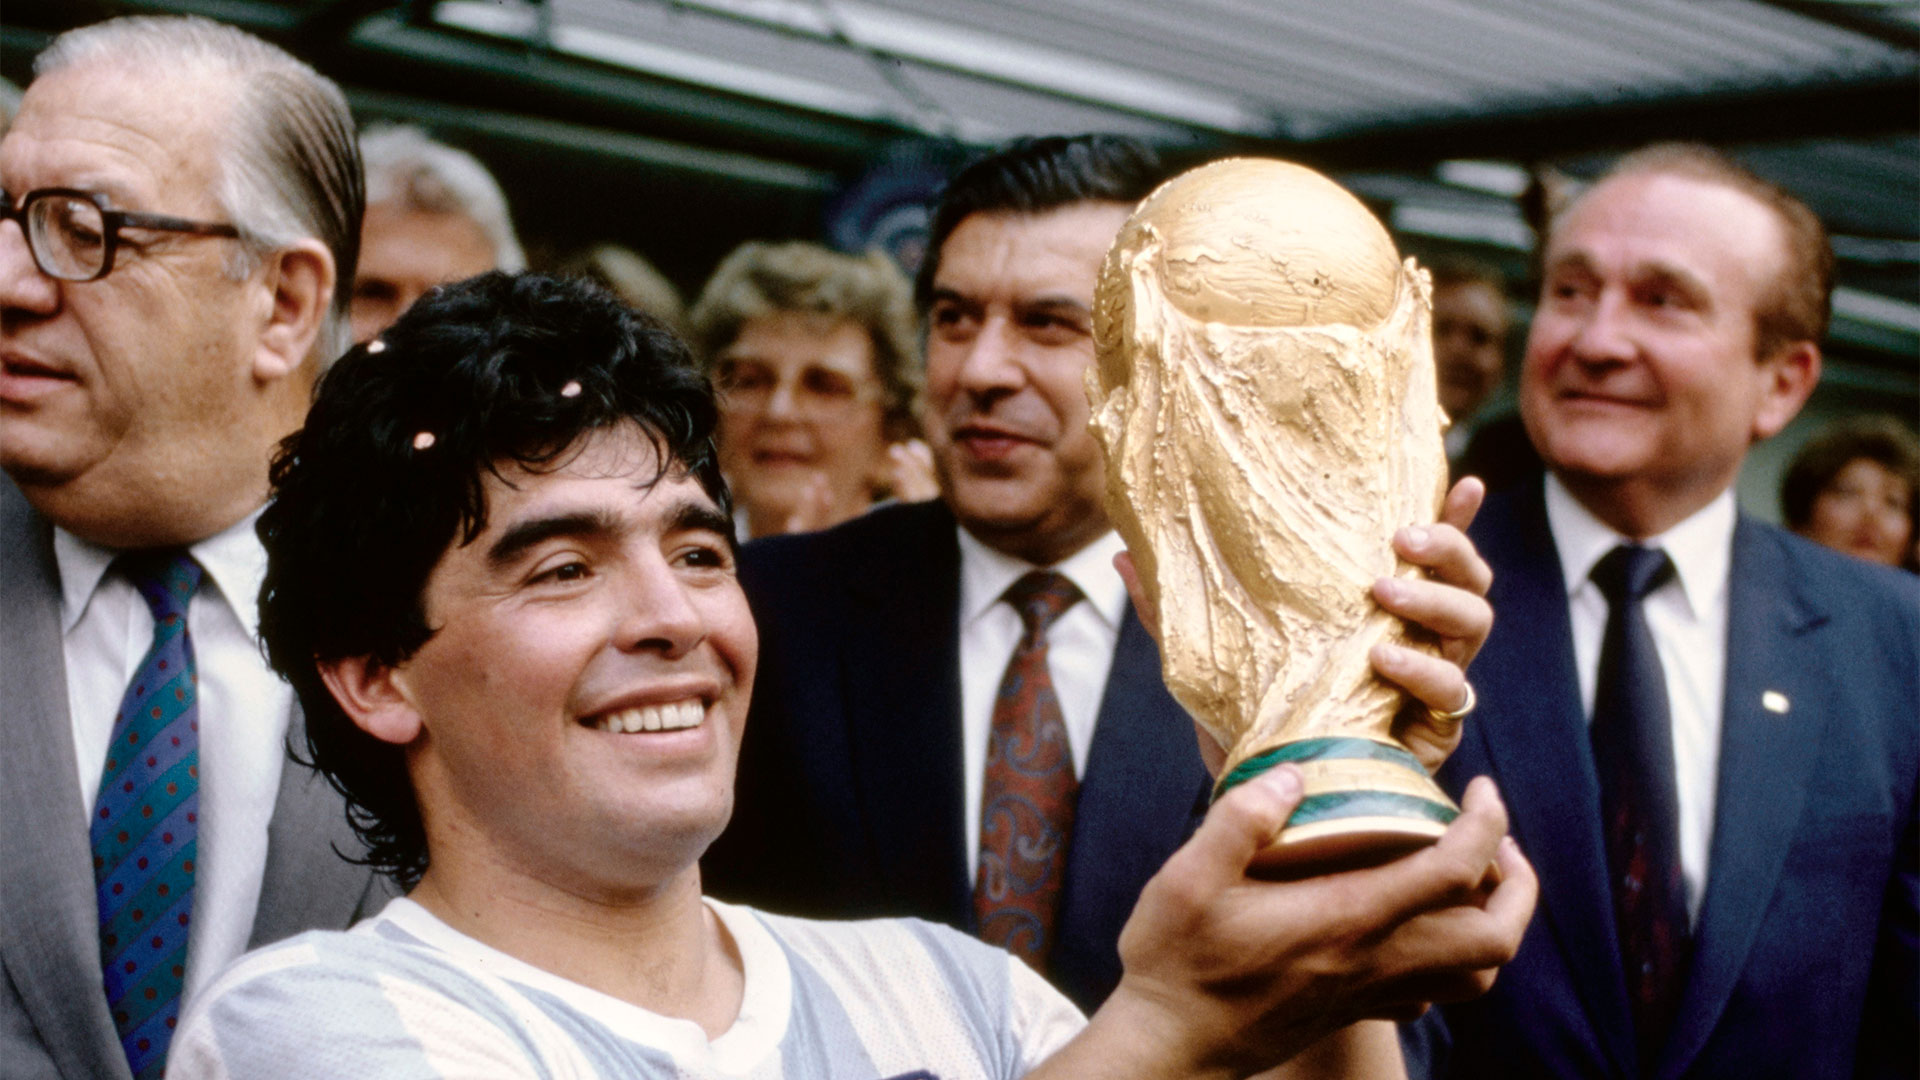 MEXICO CITY, MEXICO - JUNE 29: Argentina captain Diego Maradona holds aloft the trophy after the FIFA 1986 World Cup  final match against West Germany at the Azteca Stadium on June 29th, 1986 in Mexico City, Mexico. (Photo by Mike King/Allsport/Getty Images/Hulton Archive)